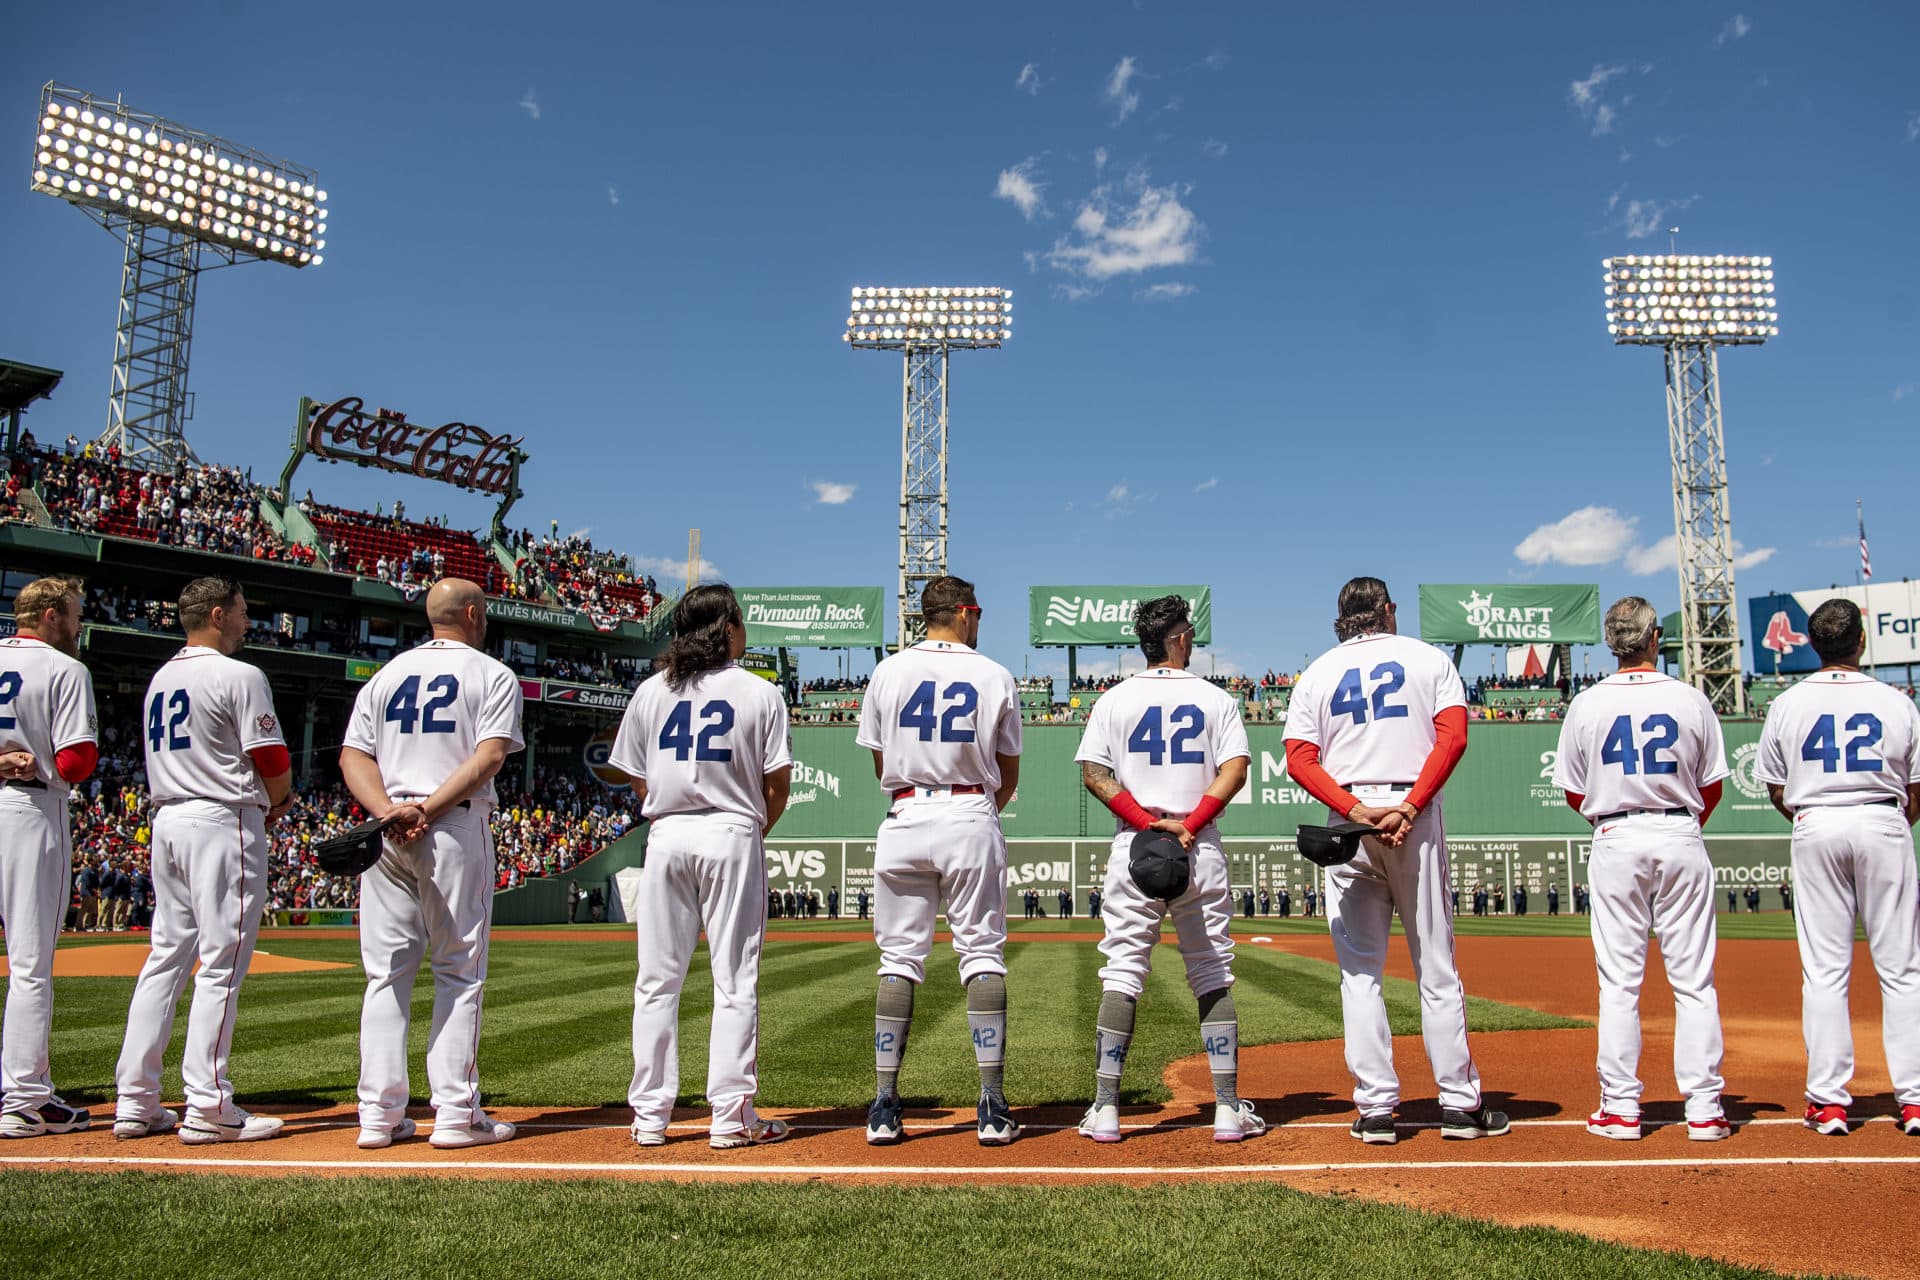 Members of the Boston Red Sox display the number 42 in recognition of Jackie Robinson Day, as starting lineups are introduced before the opening day game against the Minnesota Twins on April 15 at Fenway Park. (Billie Weiss/Boston Red Sox/Getty Images)